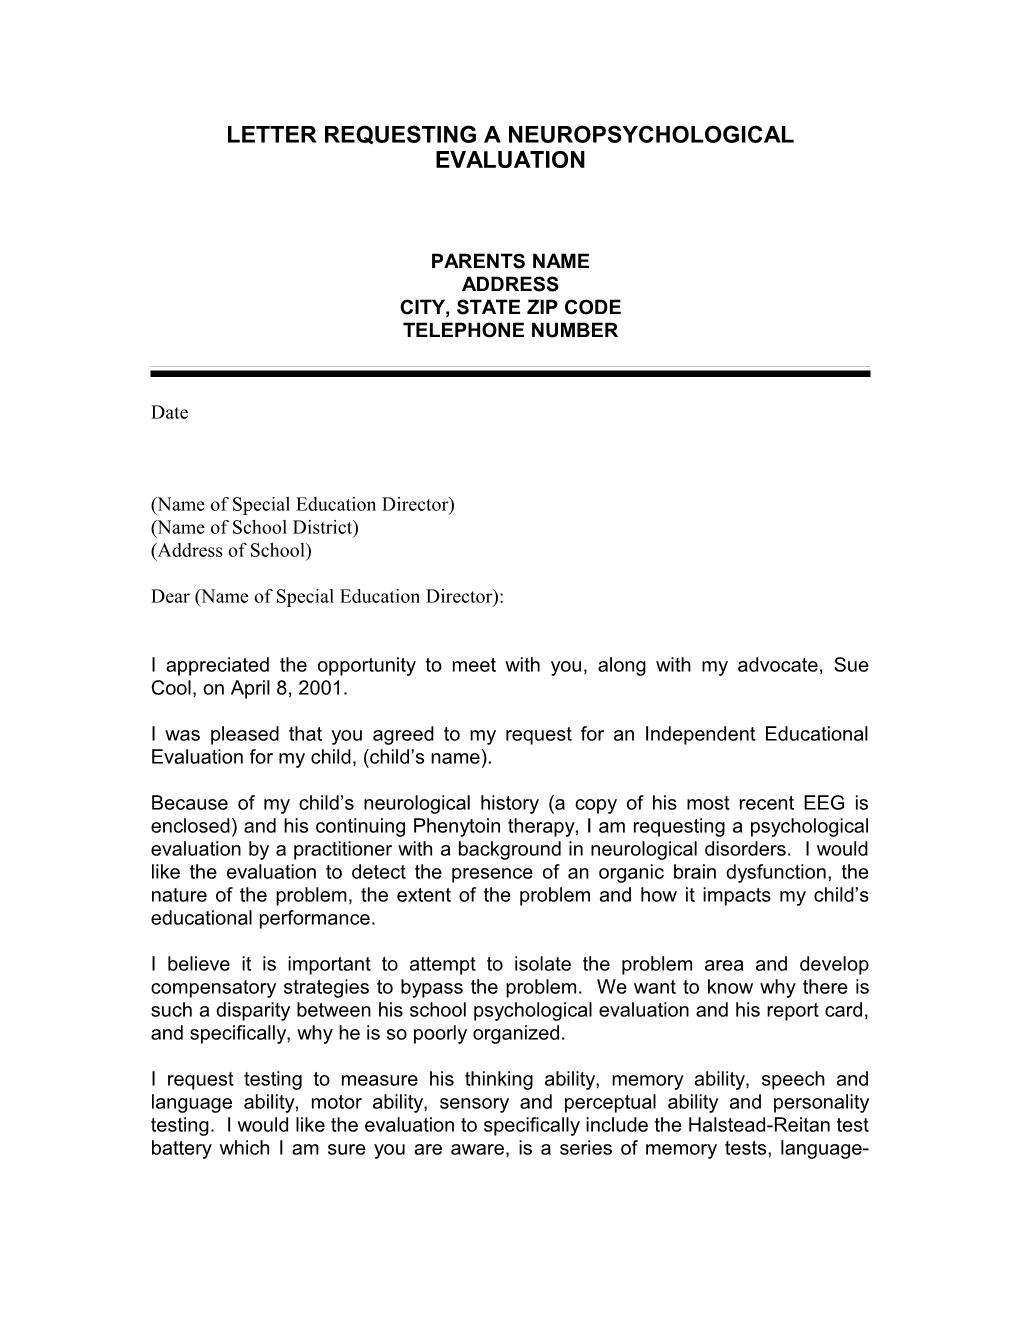 Letter Requesting an Independent Evaluation